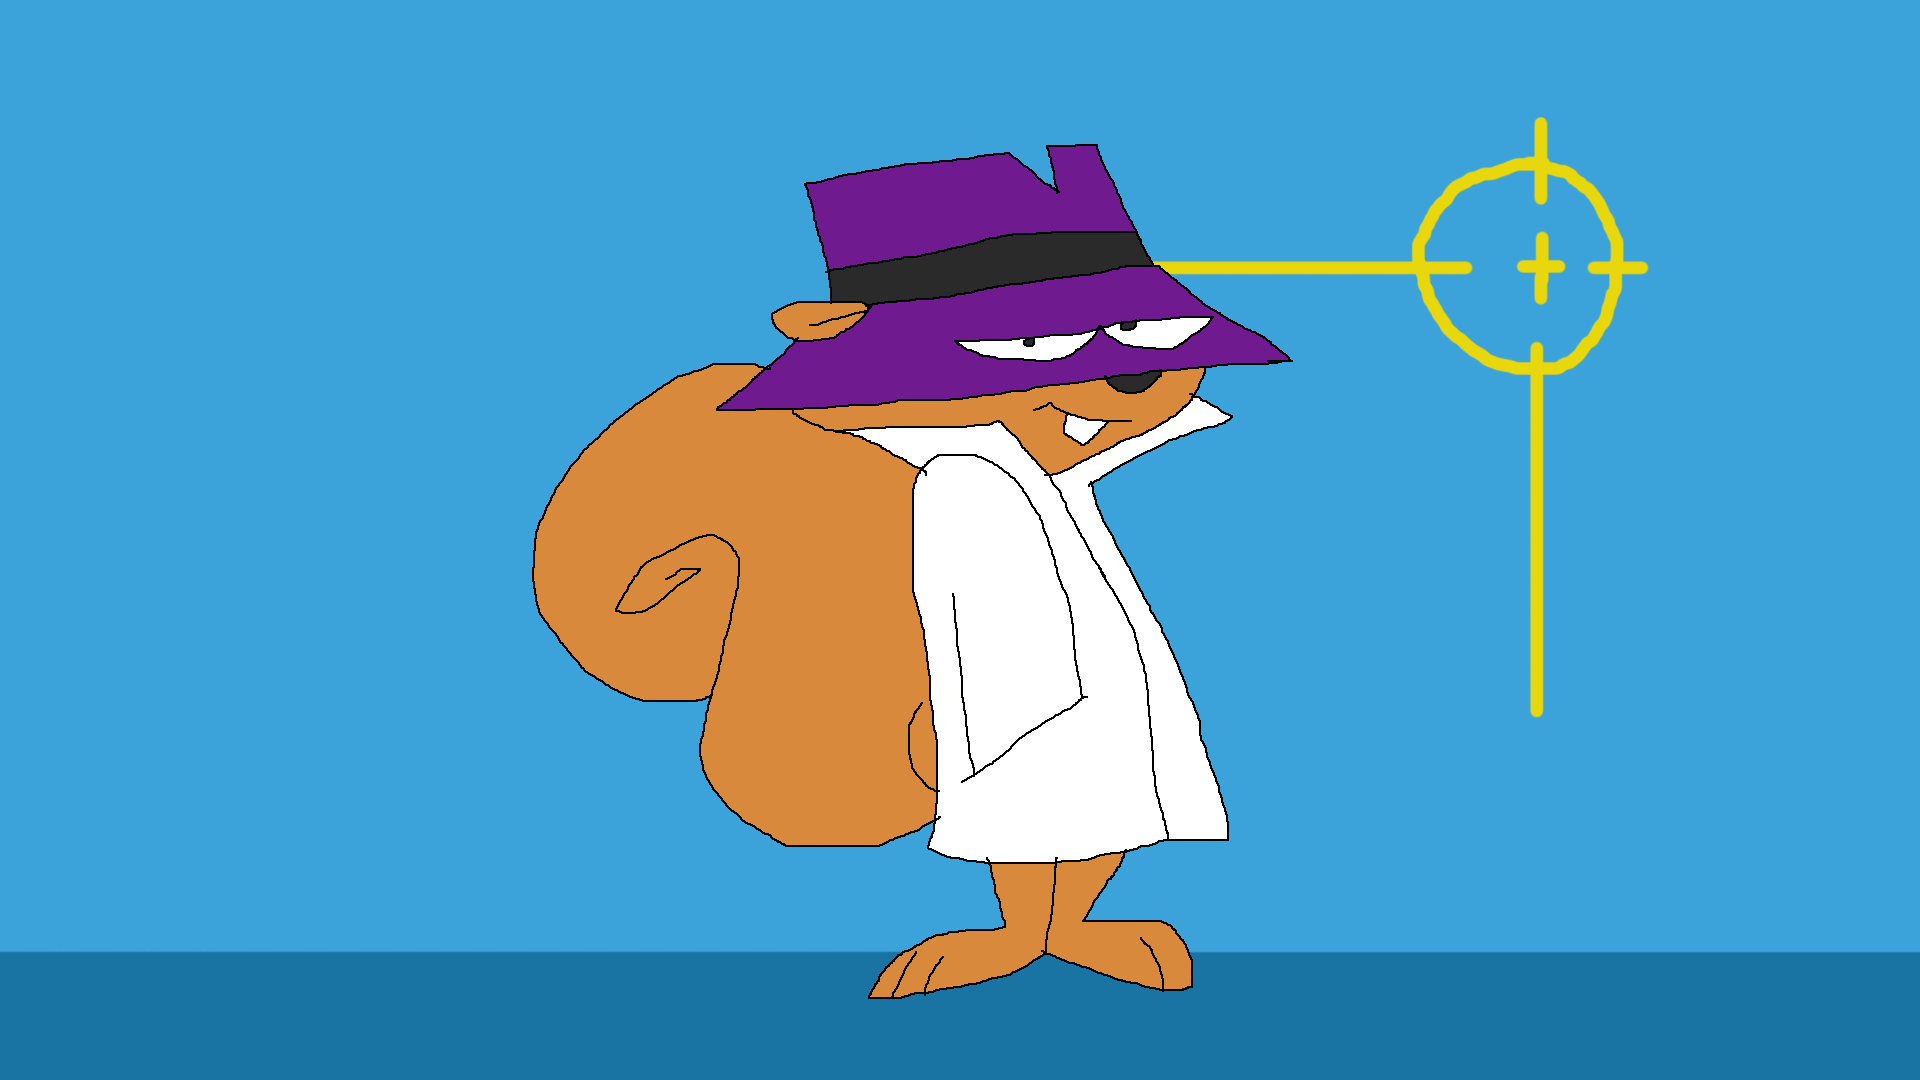 Here comes Secret Squirrel by TomArmstrong20 on DeviantArt